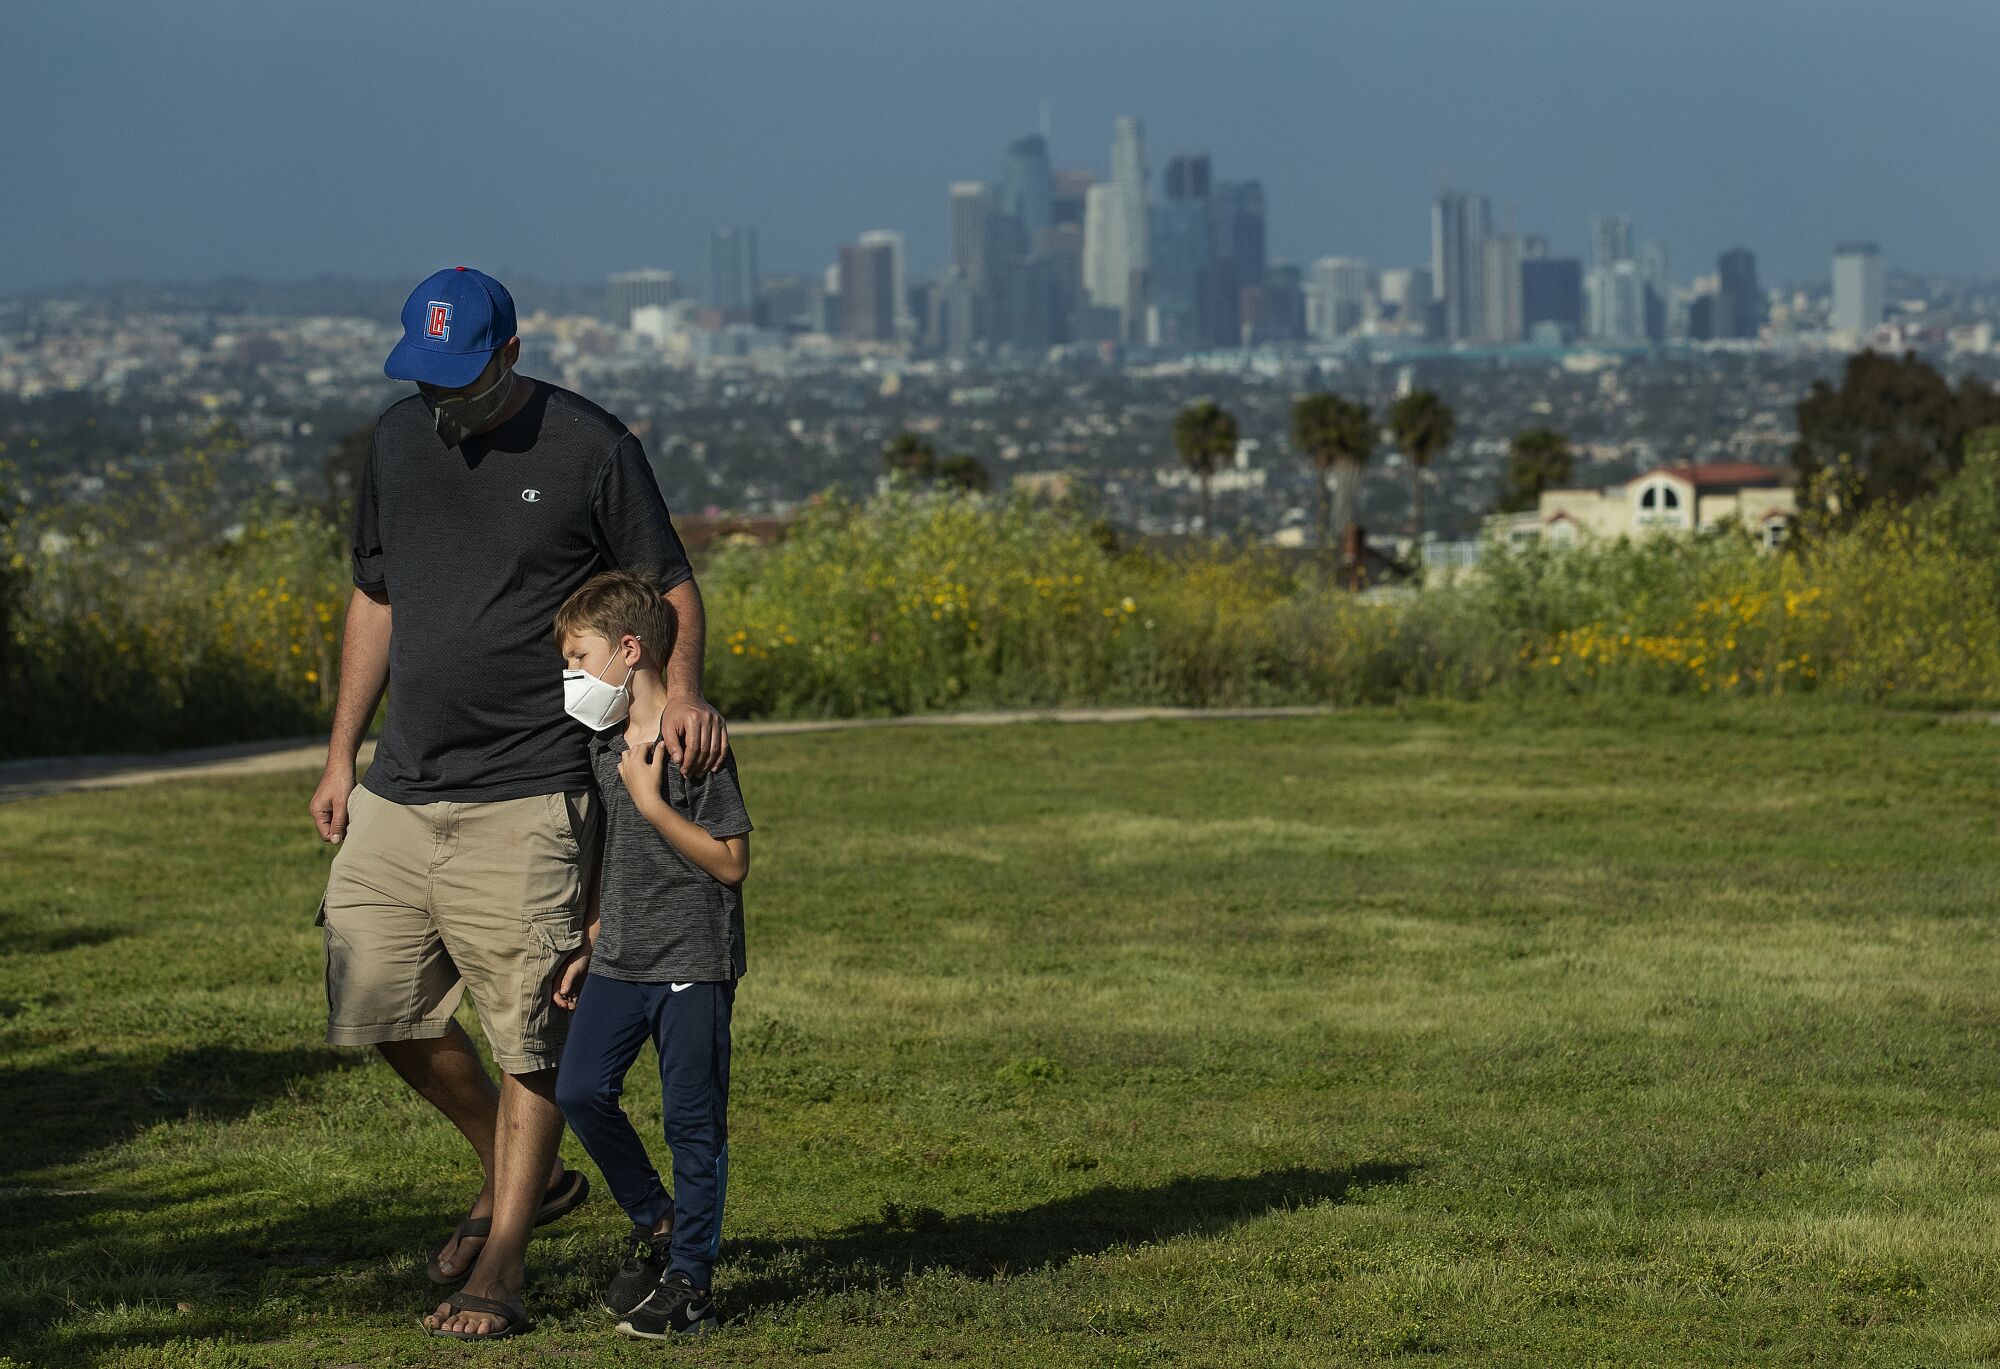 Lee Bloom, 39, of Los Angeles and his son Evan, 7 wear protective masks against the coronavirus during a visit to Kenneth Hahn State Recreation Area in Los Angeles.